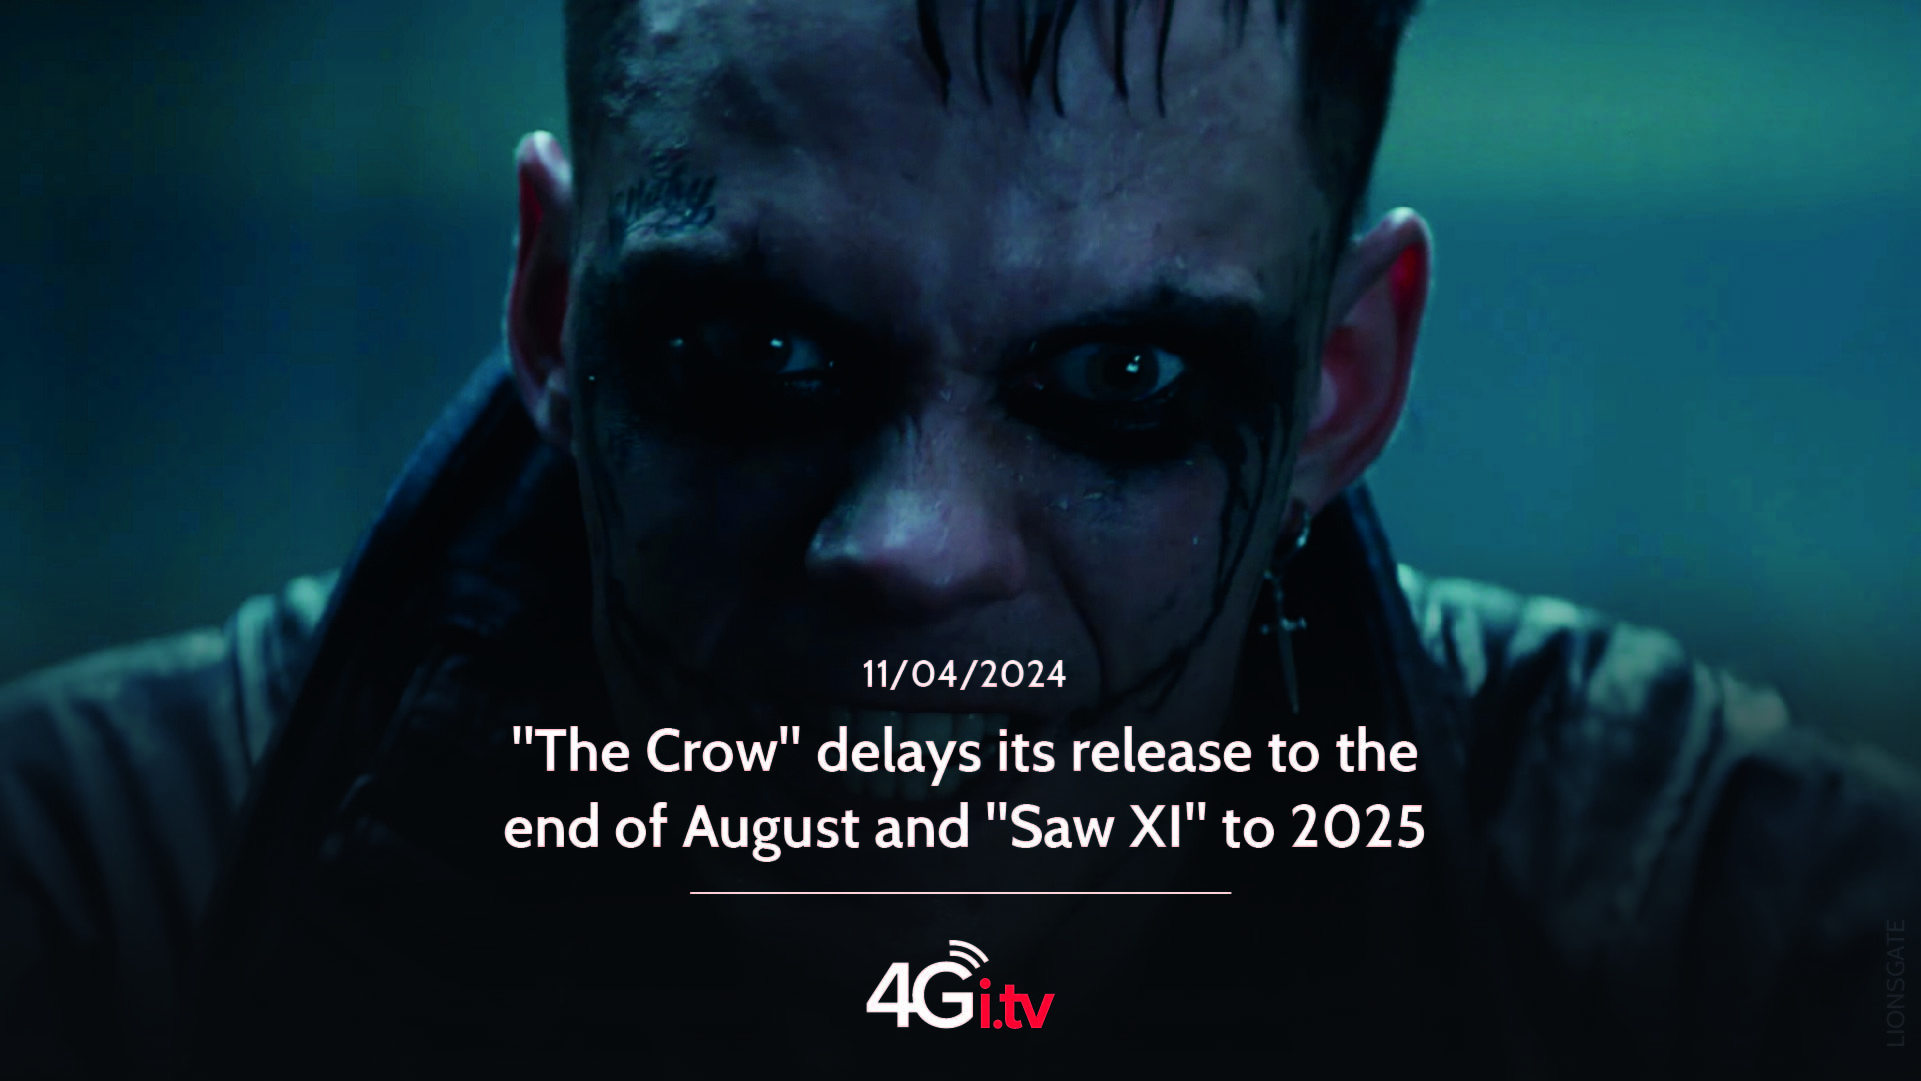 Lesen Sie mehr über den Artikel “The Crow” delays its release to the end of August and “Saw XI” to 2025